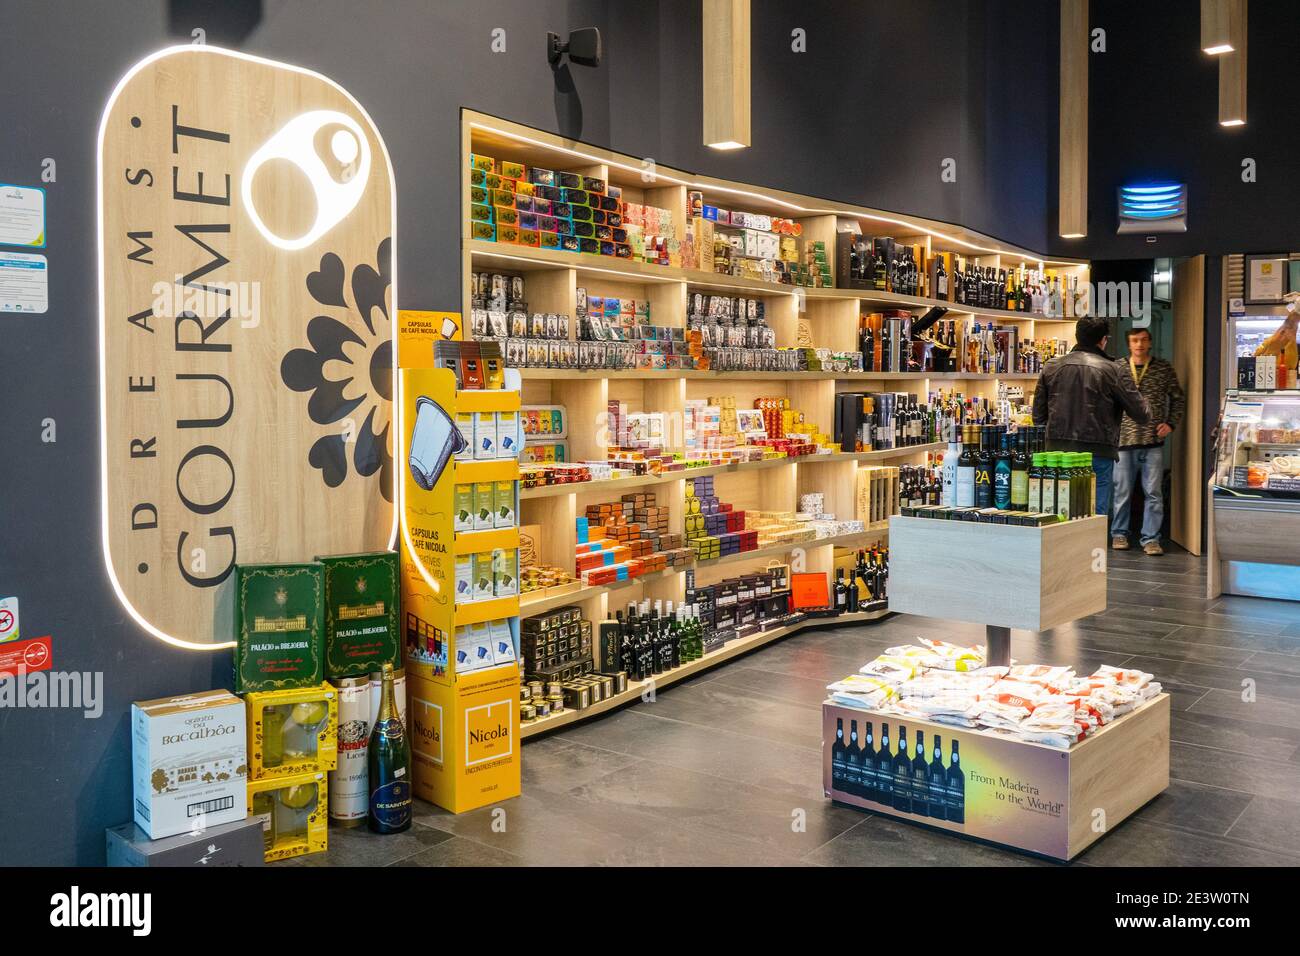 Dreams Gourmet Shop Inside Lisbon International Airport  Portugal A Store Selling Portuguese Packaged Gourmet Food Stock Photo